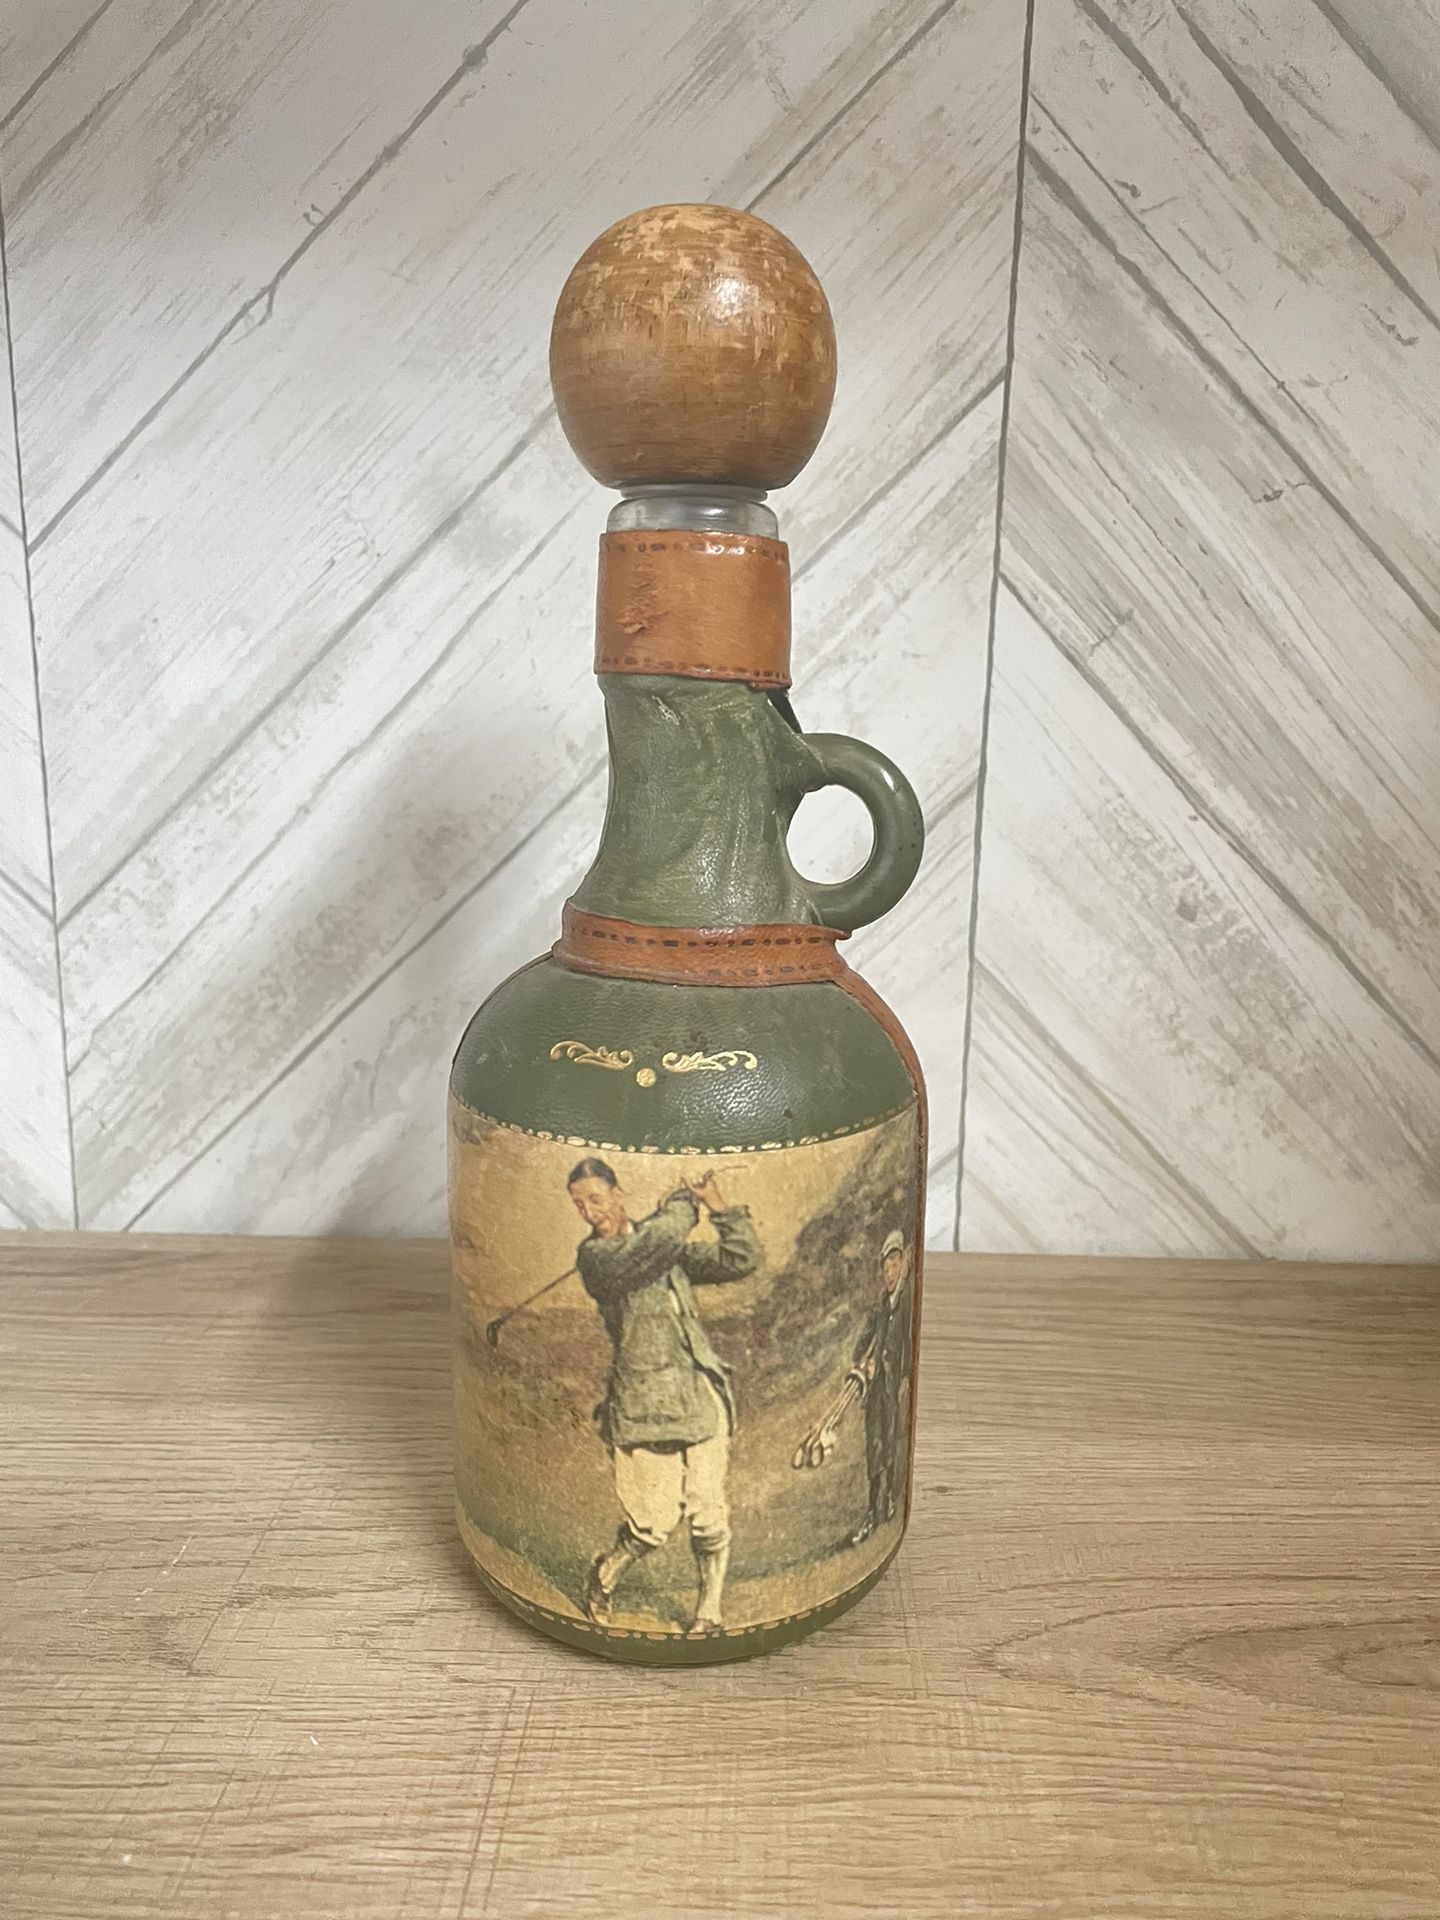 Vintage Fausto Corduri Bottle Decanter Golf Leather Wrapped Made in Italy 1960s